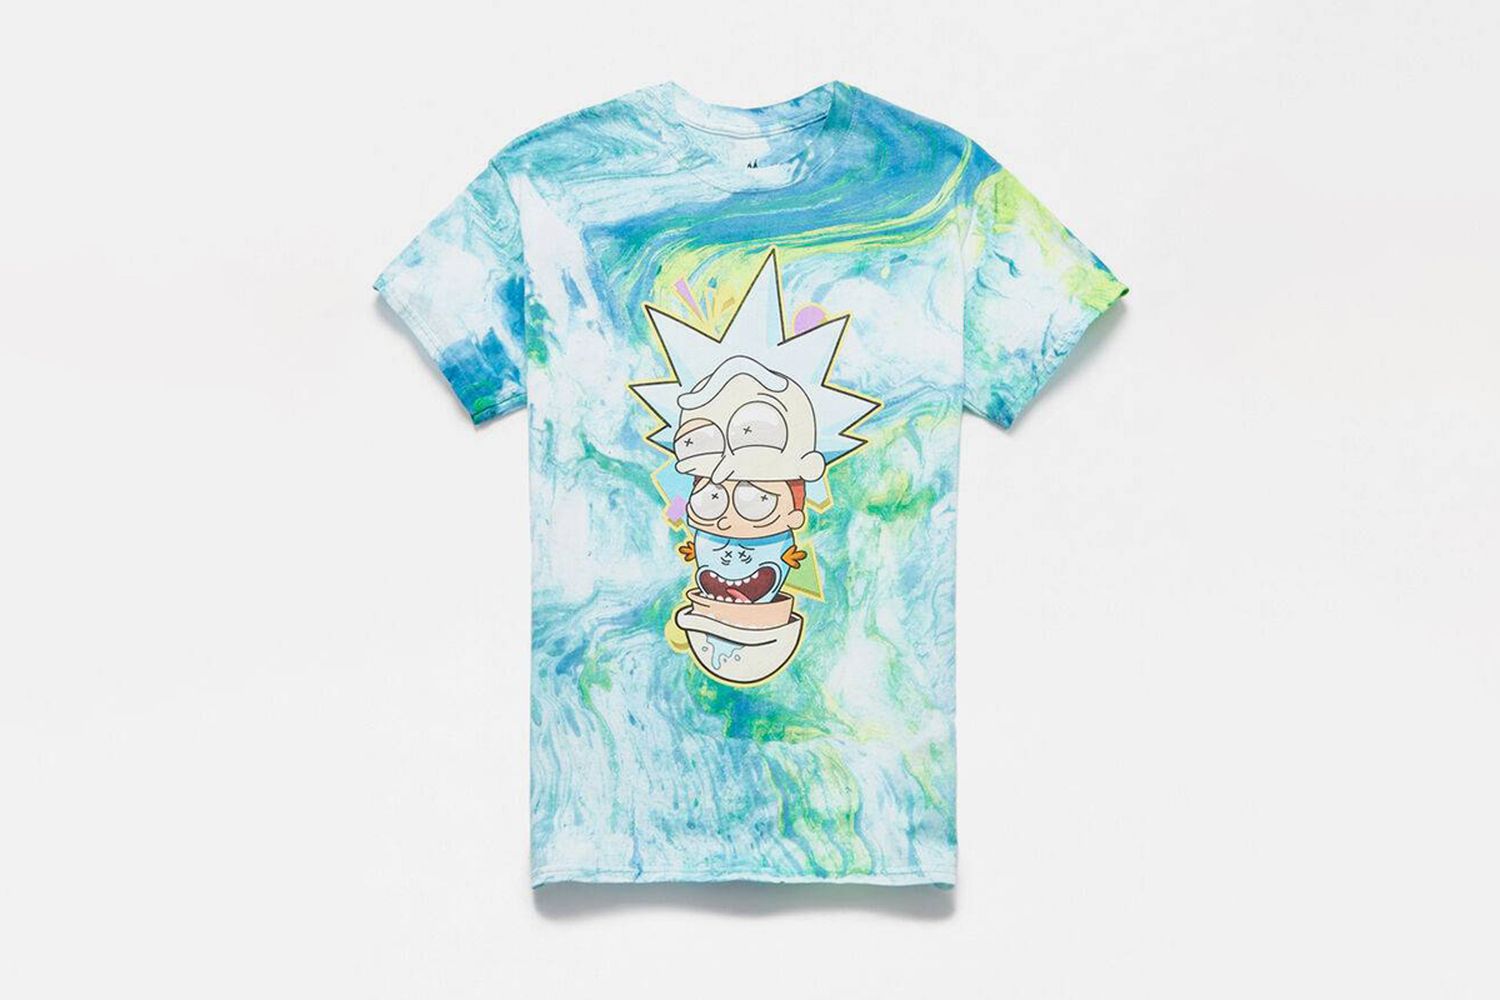 Rick And Morty Tie-Dyed T-Shirt